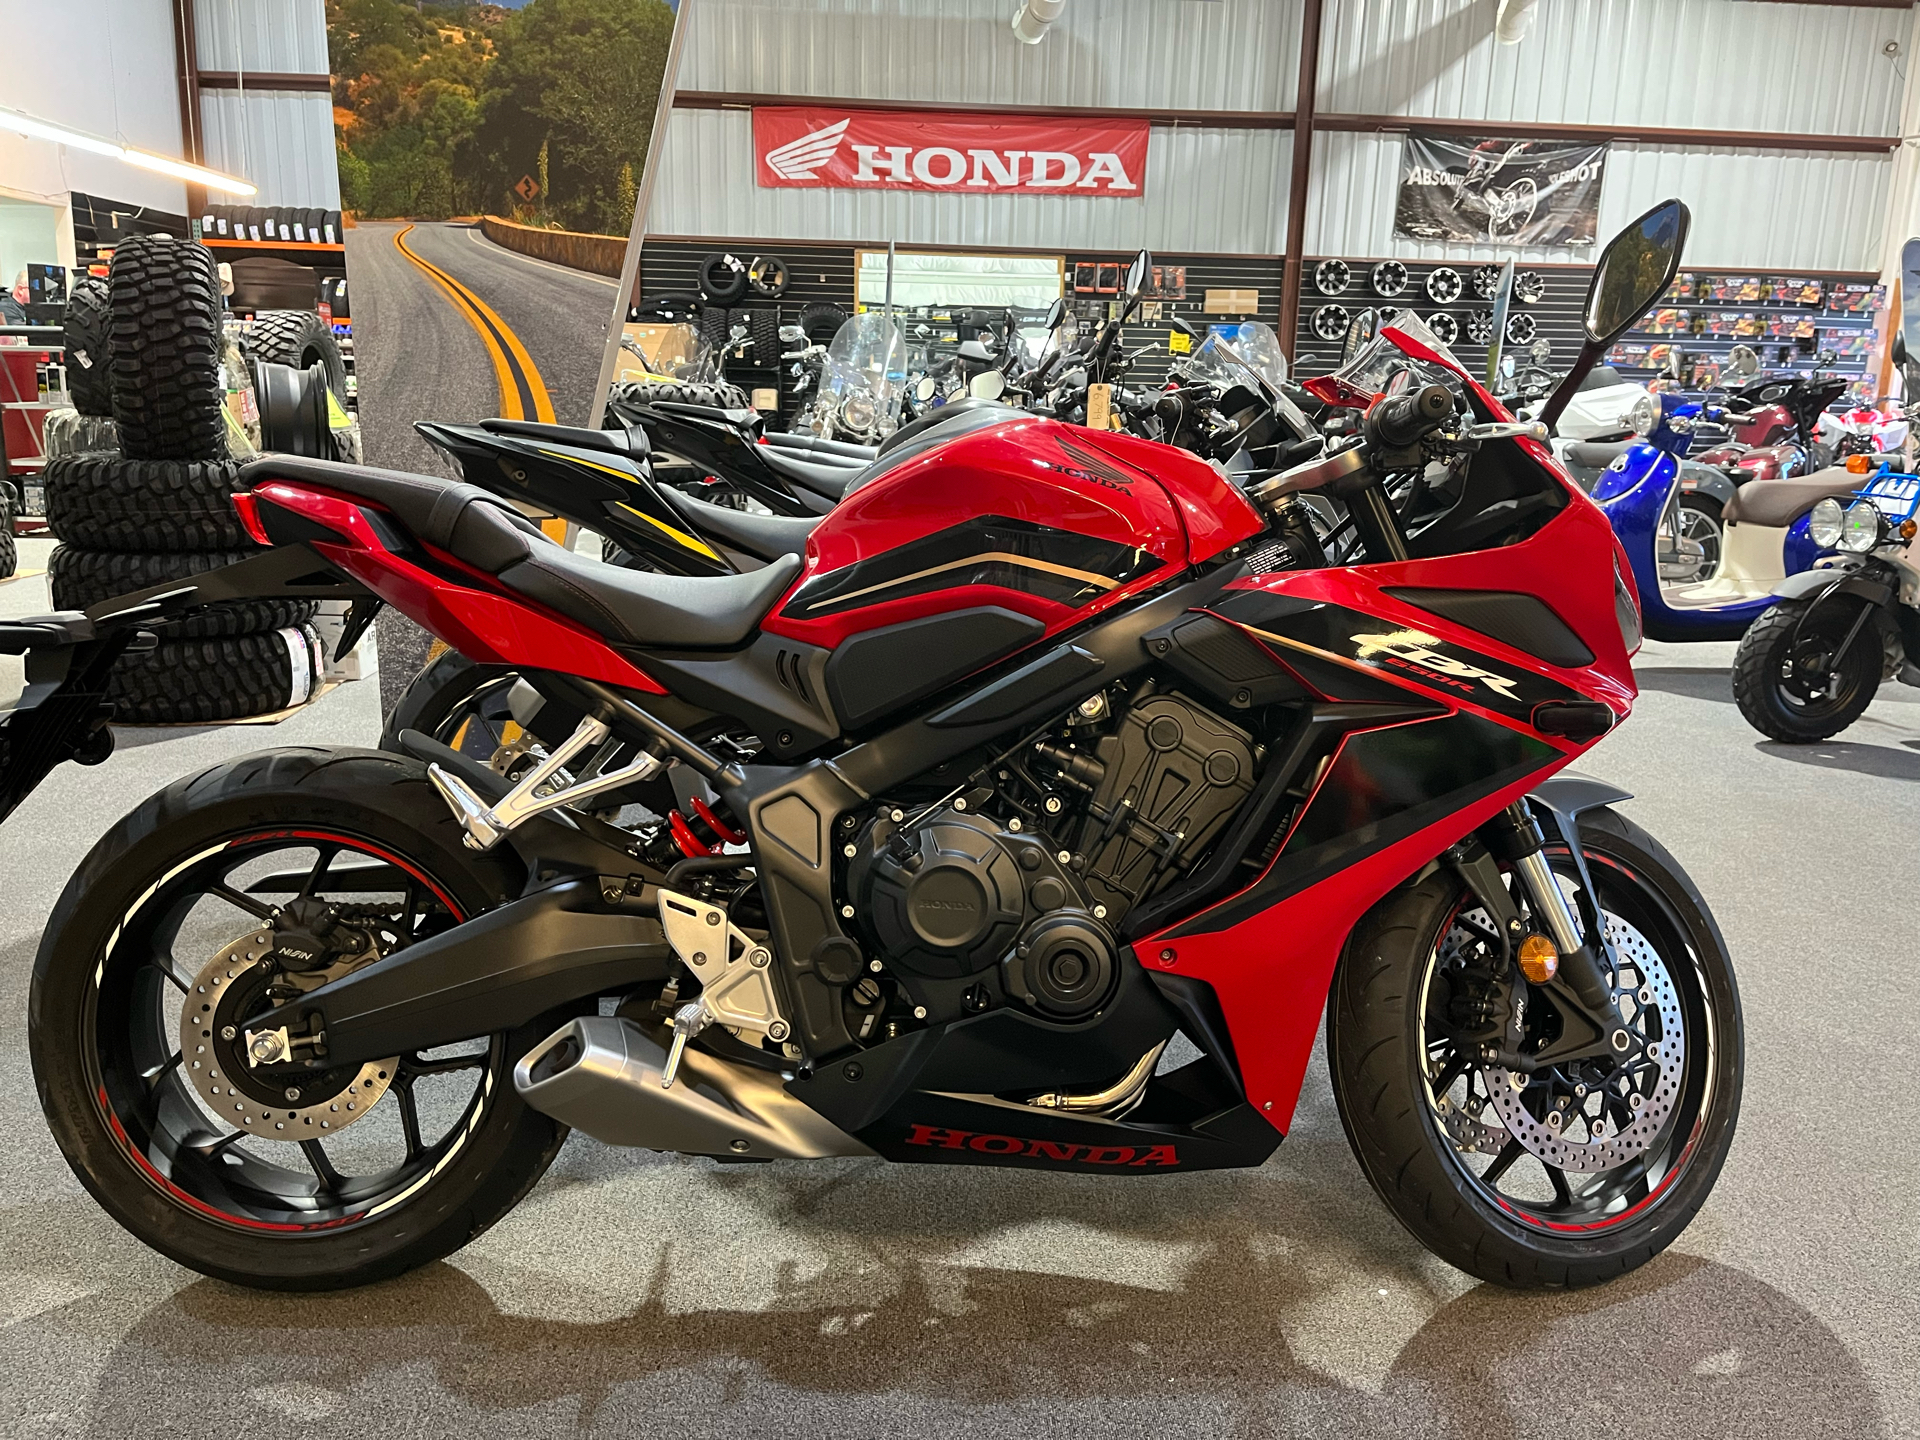 Why Buy the Honda CBR650R  The Best Middleweight Motorcycle